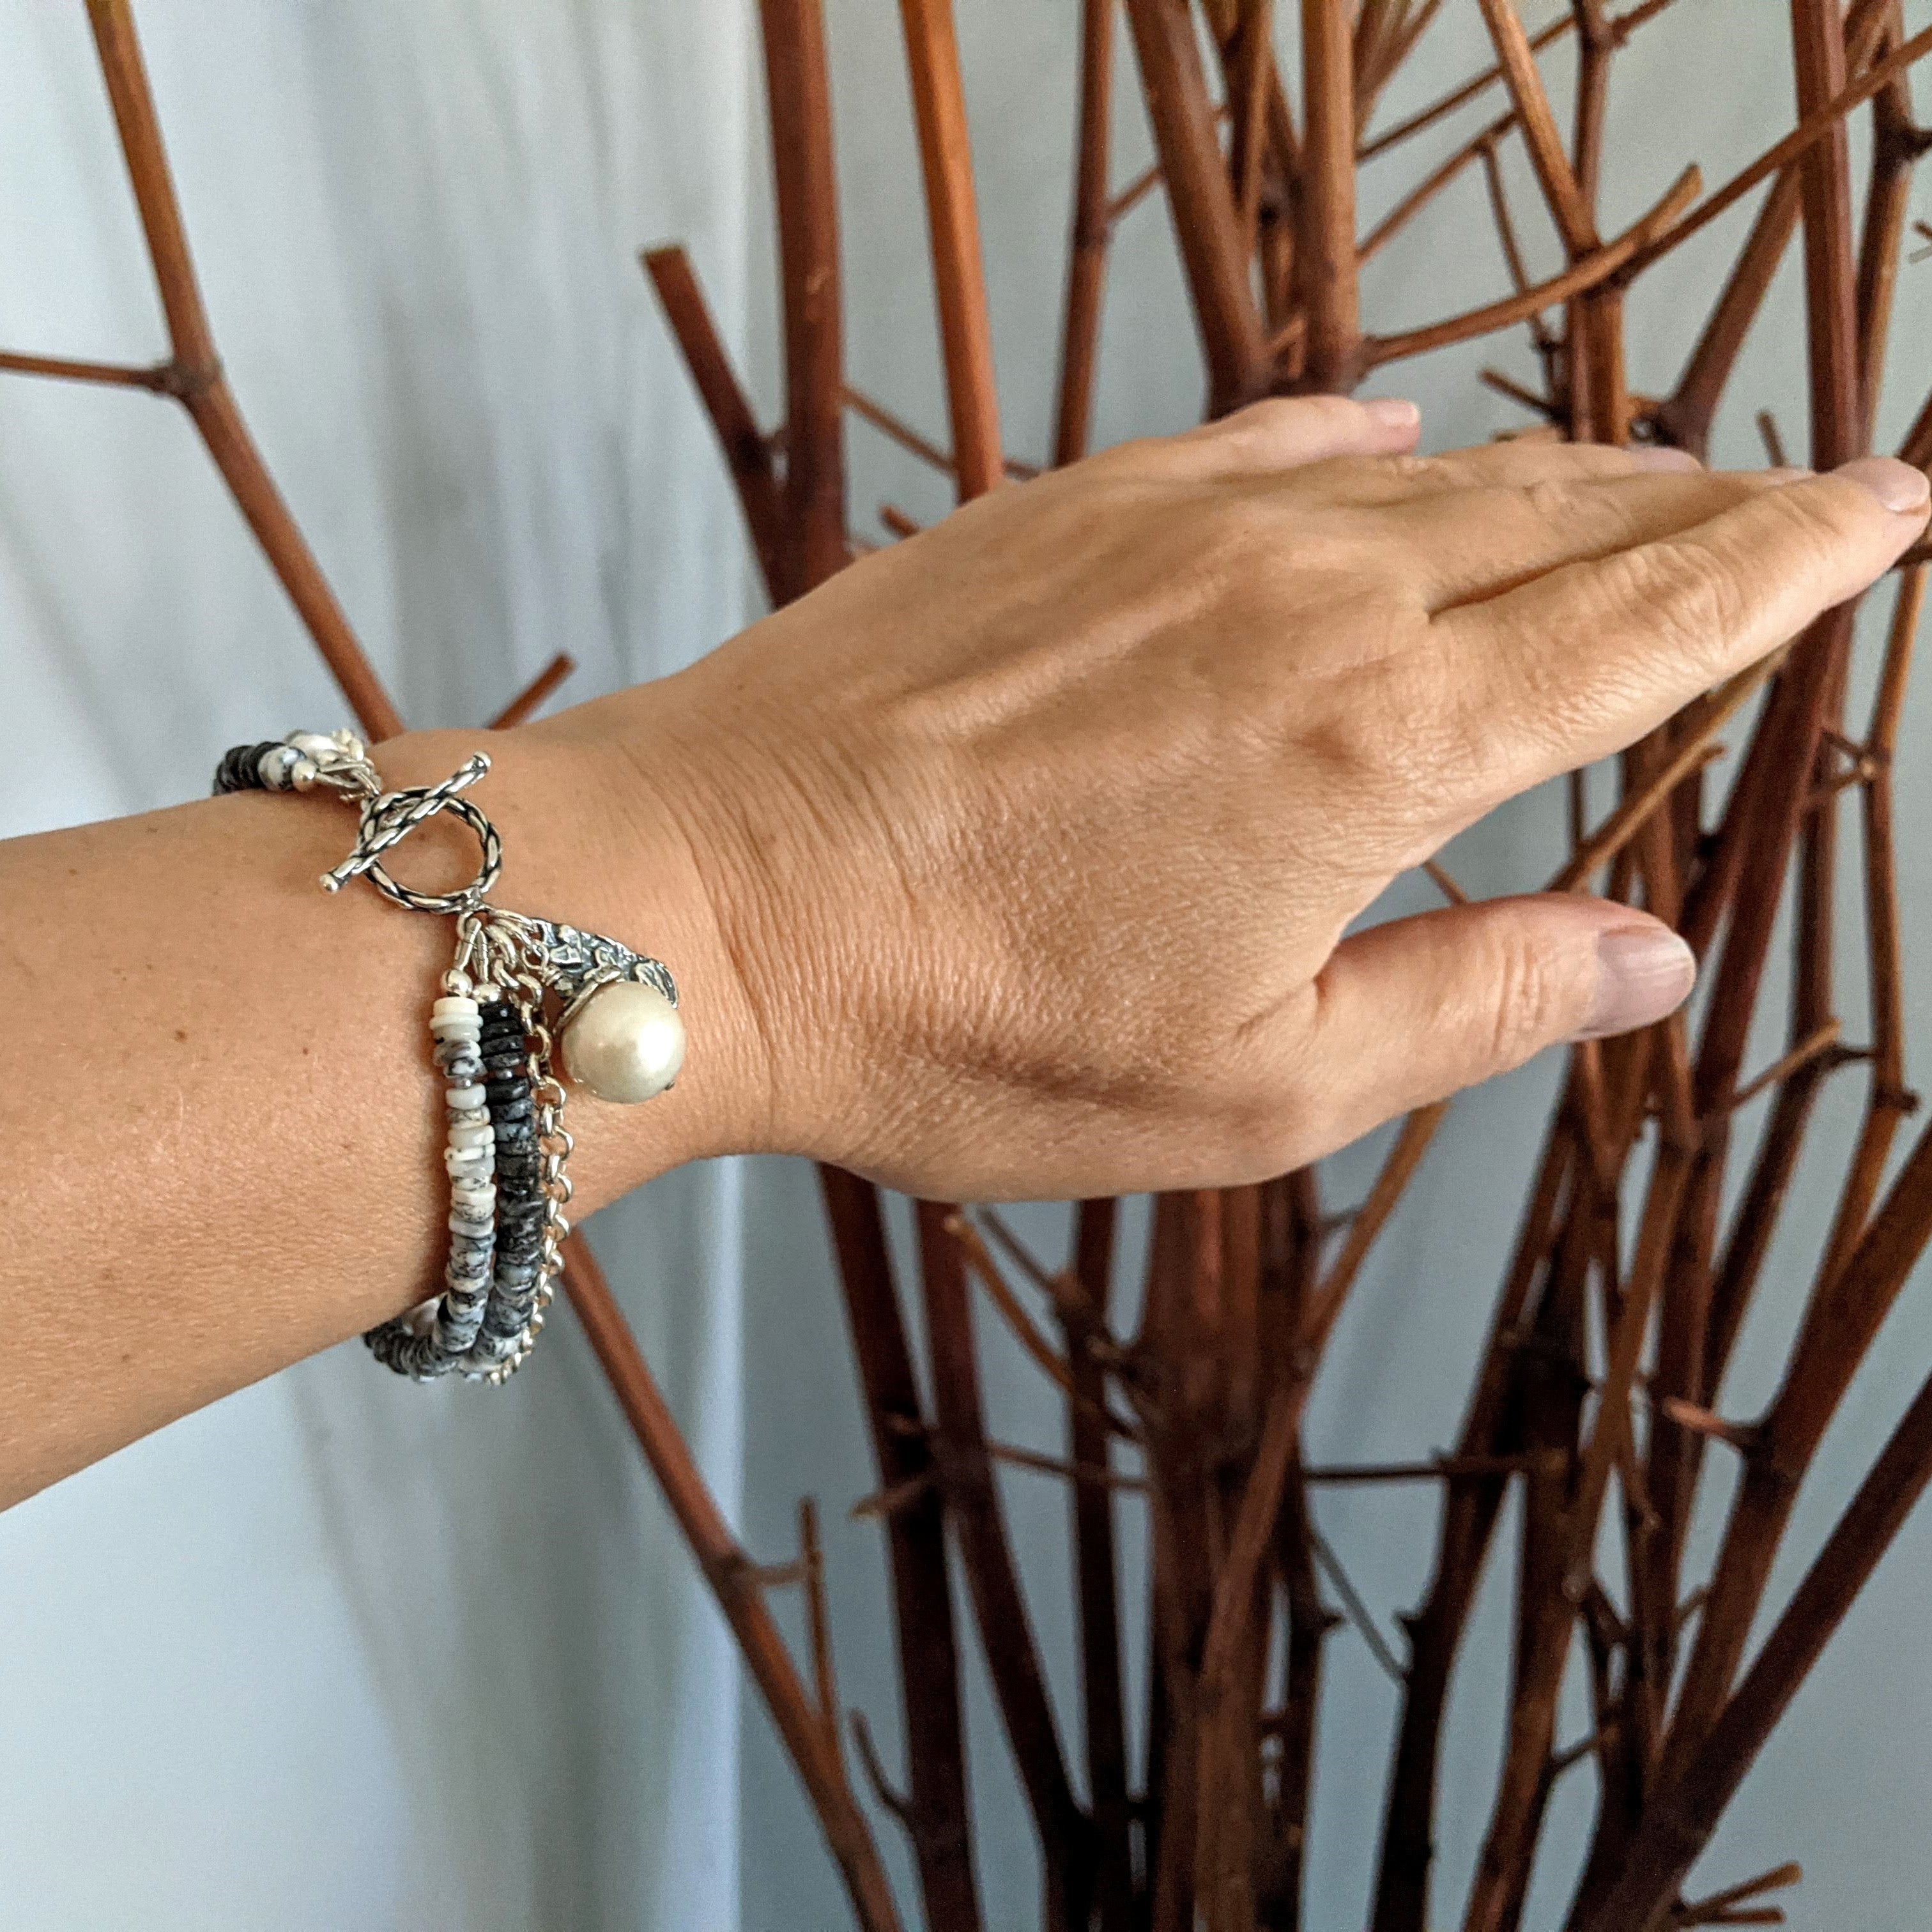 Handmade artisan grey gemstone bracelet with dendritic opal, white Edison pearl and sterling silver. Multi strand bracelet handcrafted by Aurora Creative Jewellery.